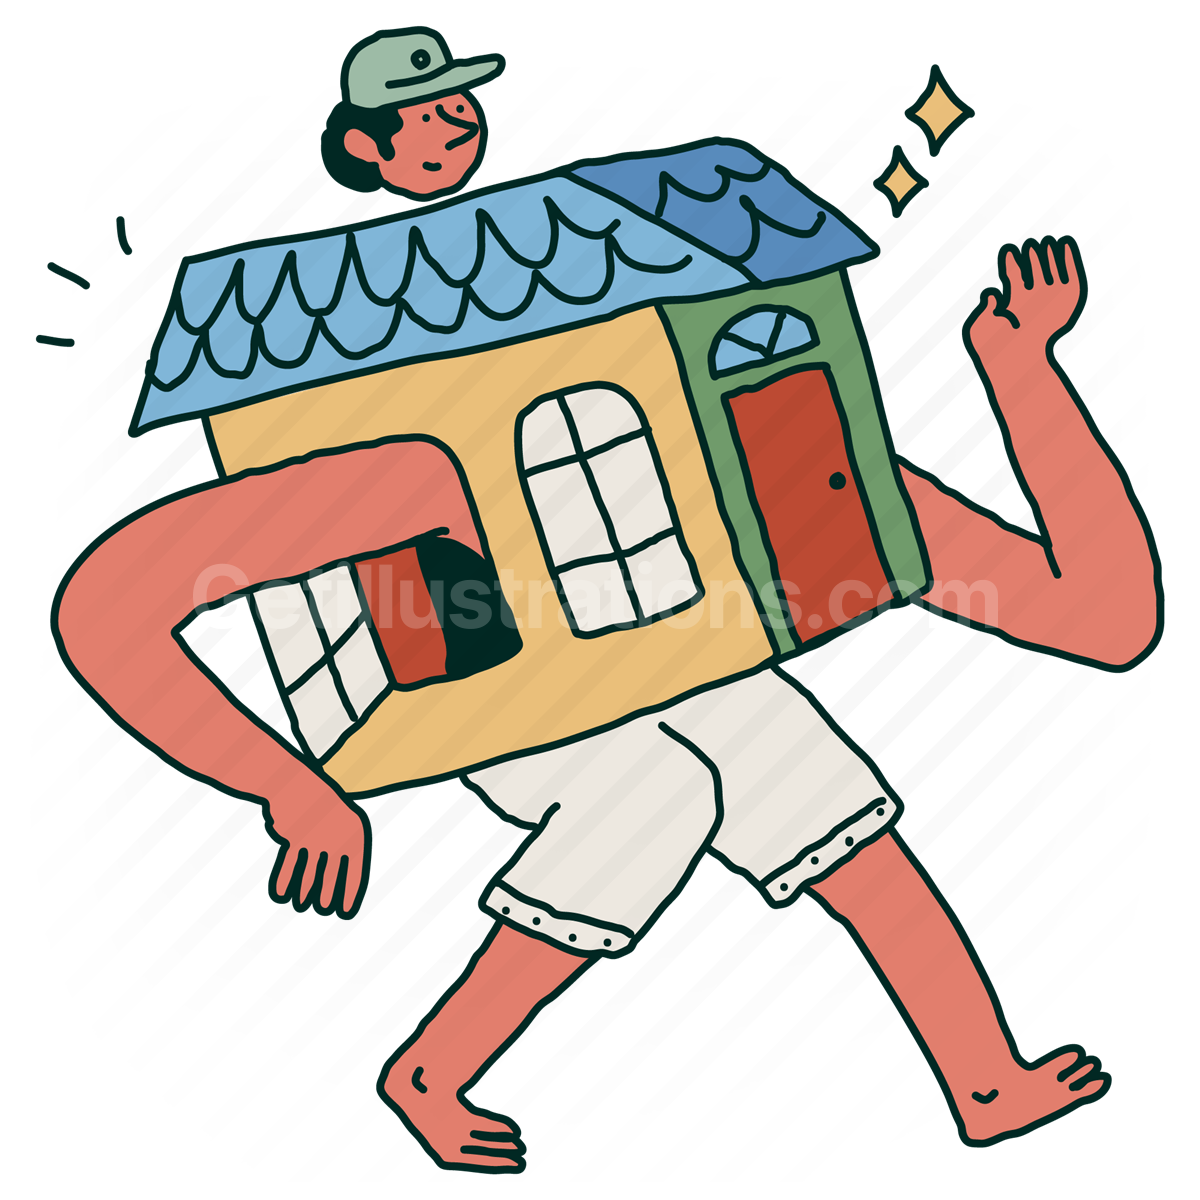 Real Estate and Architecture  illustration